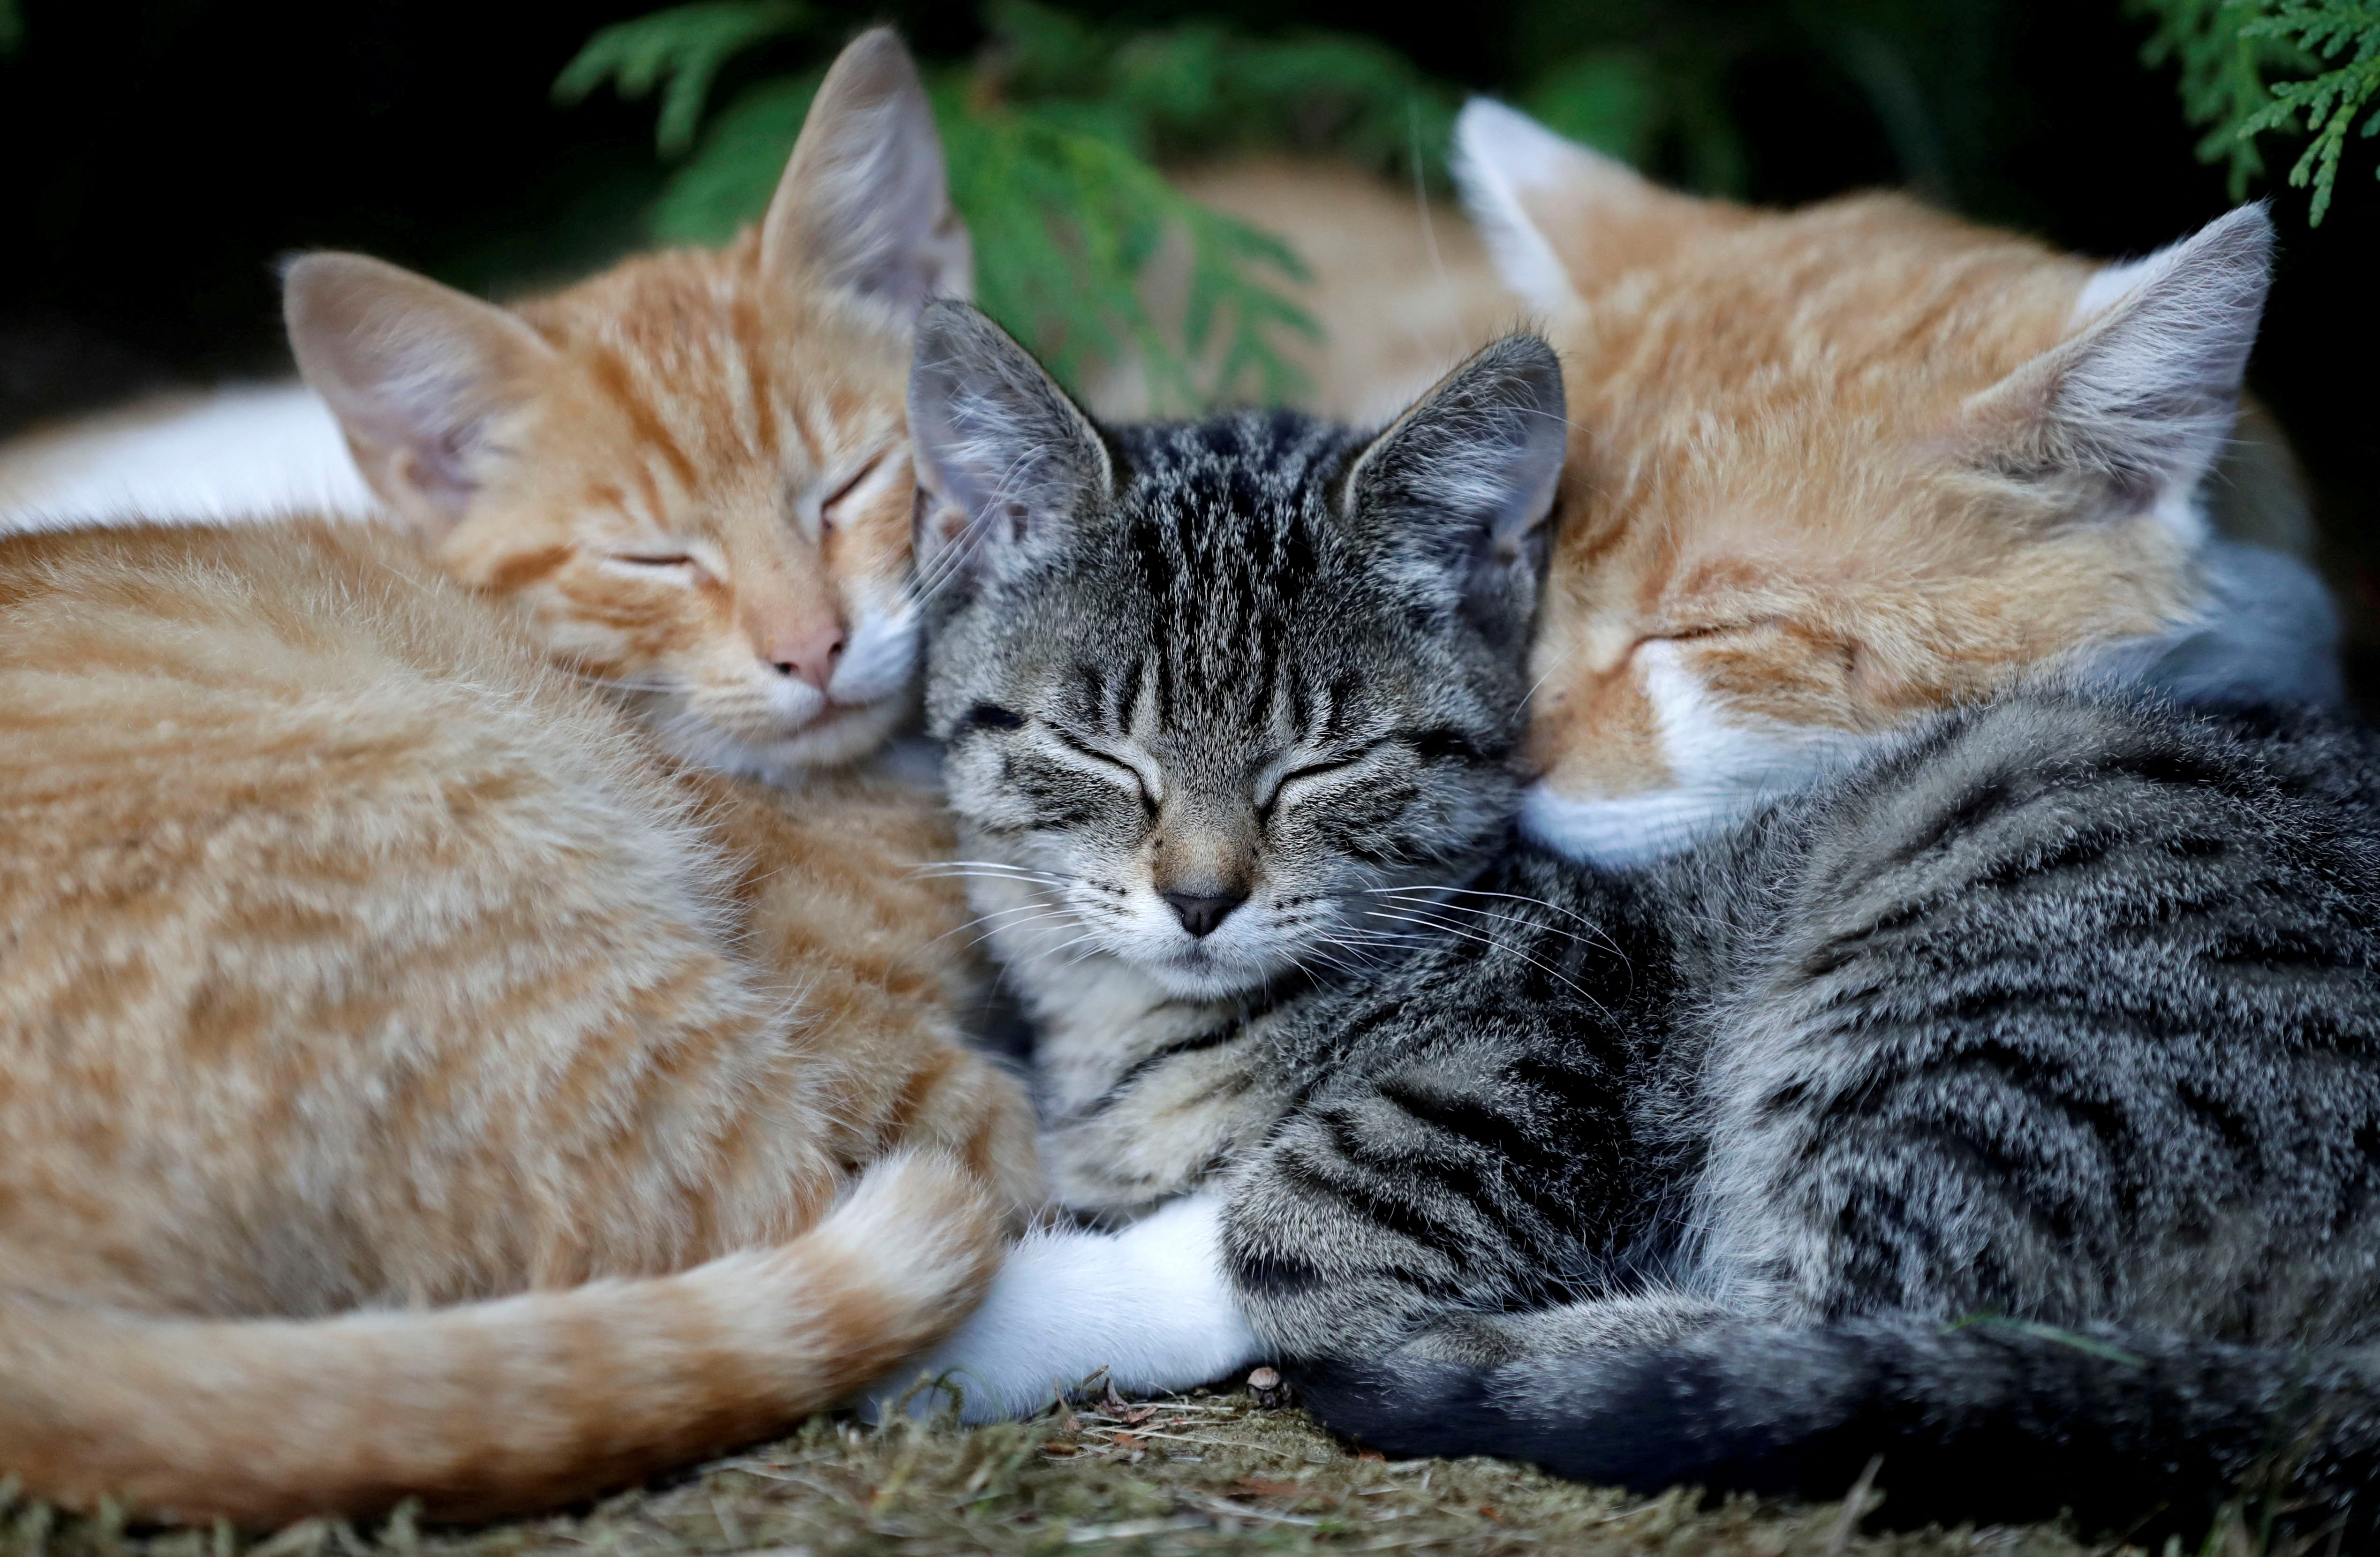 Cats sleep in the village of Krompach near the town of Cvikov